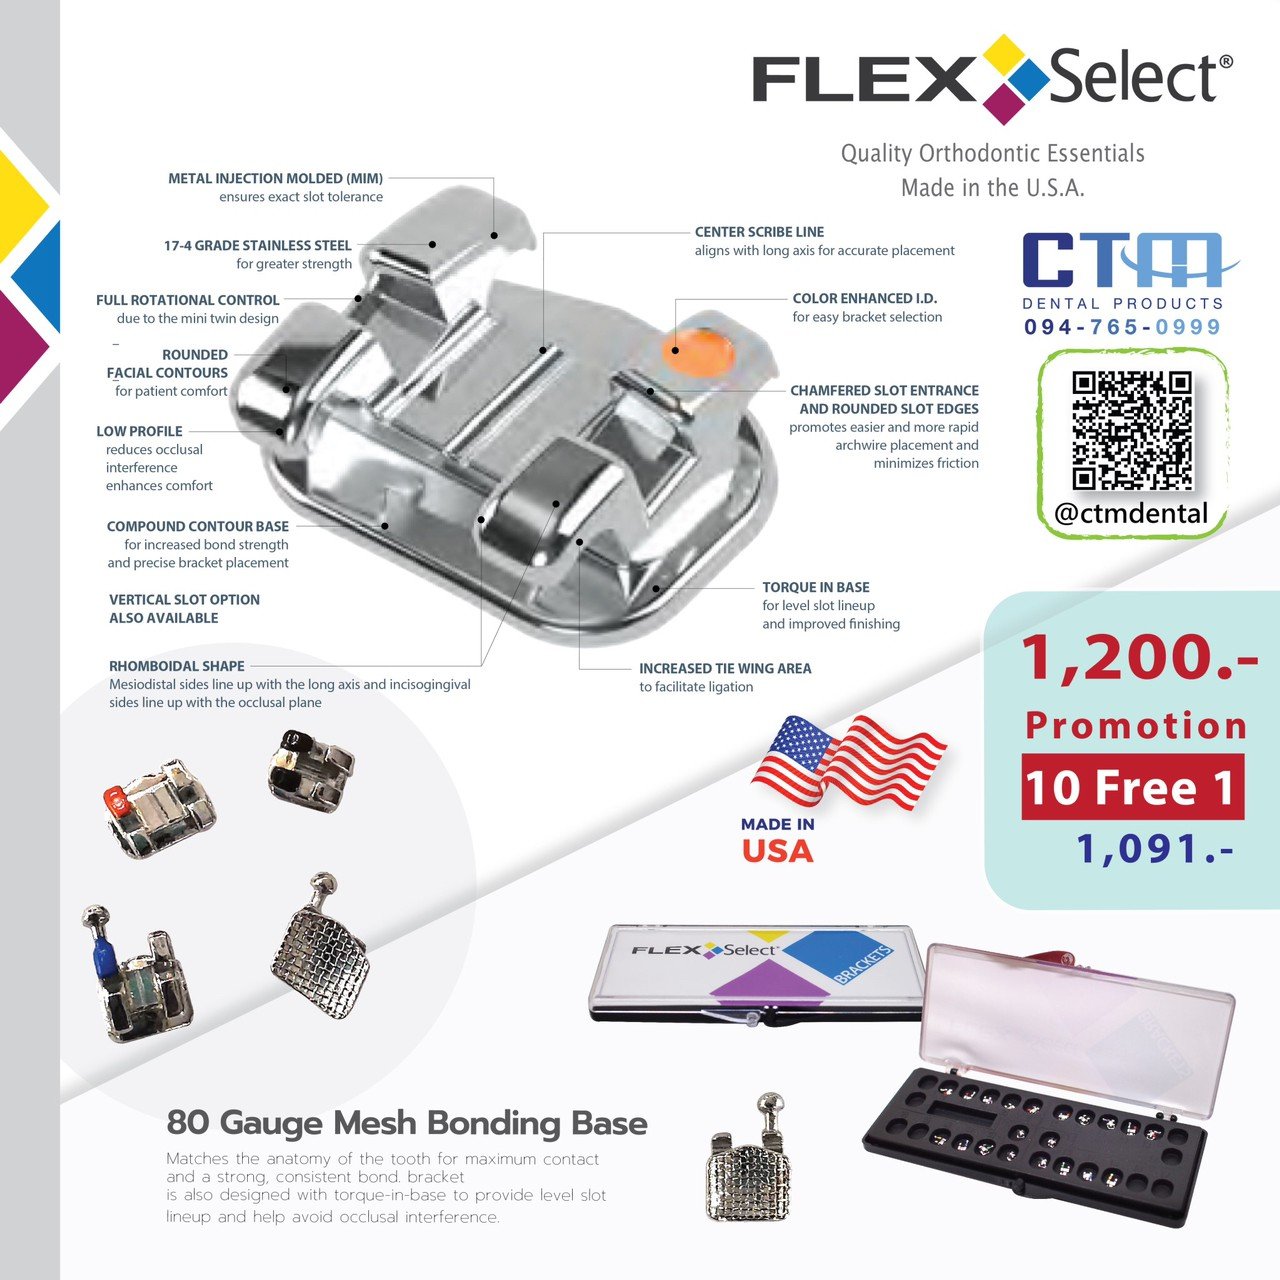 CTM FLEX Select Bracket High Quality Made in the U.S.A.